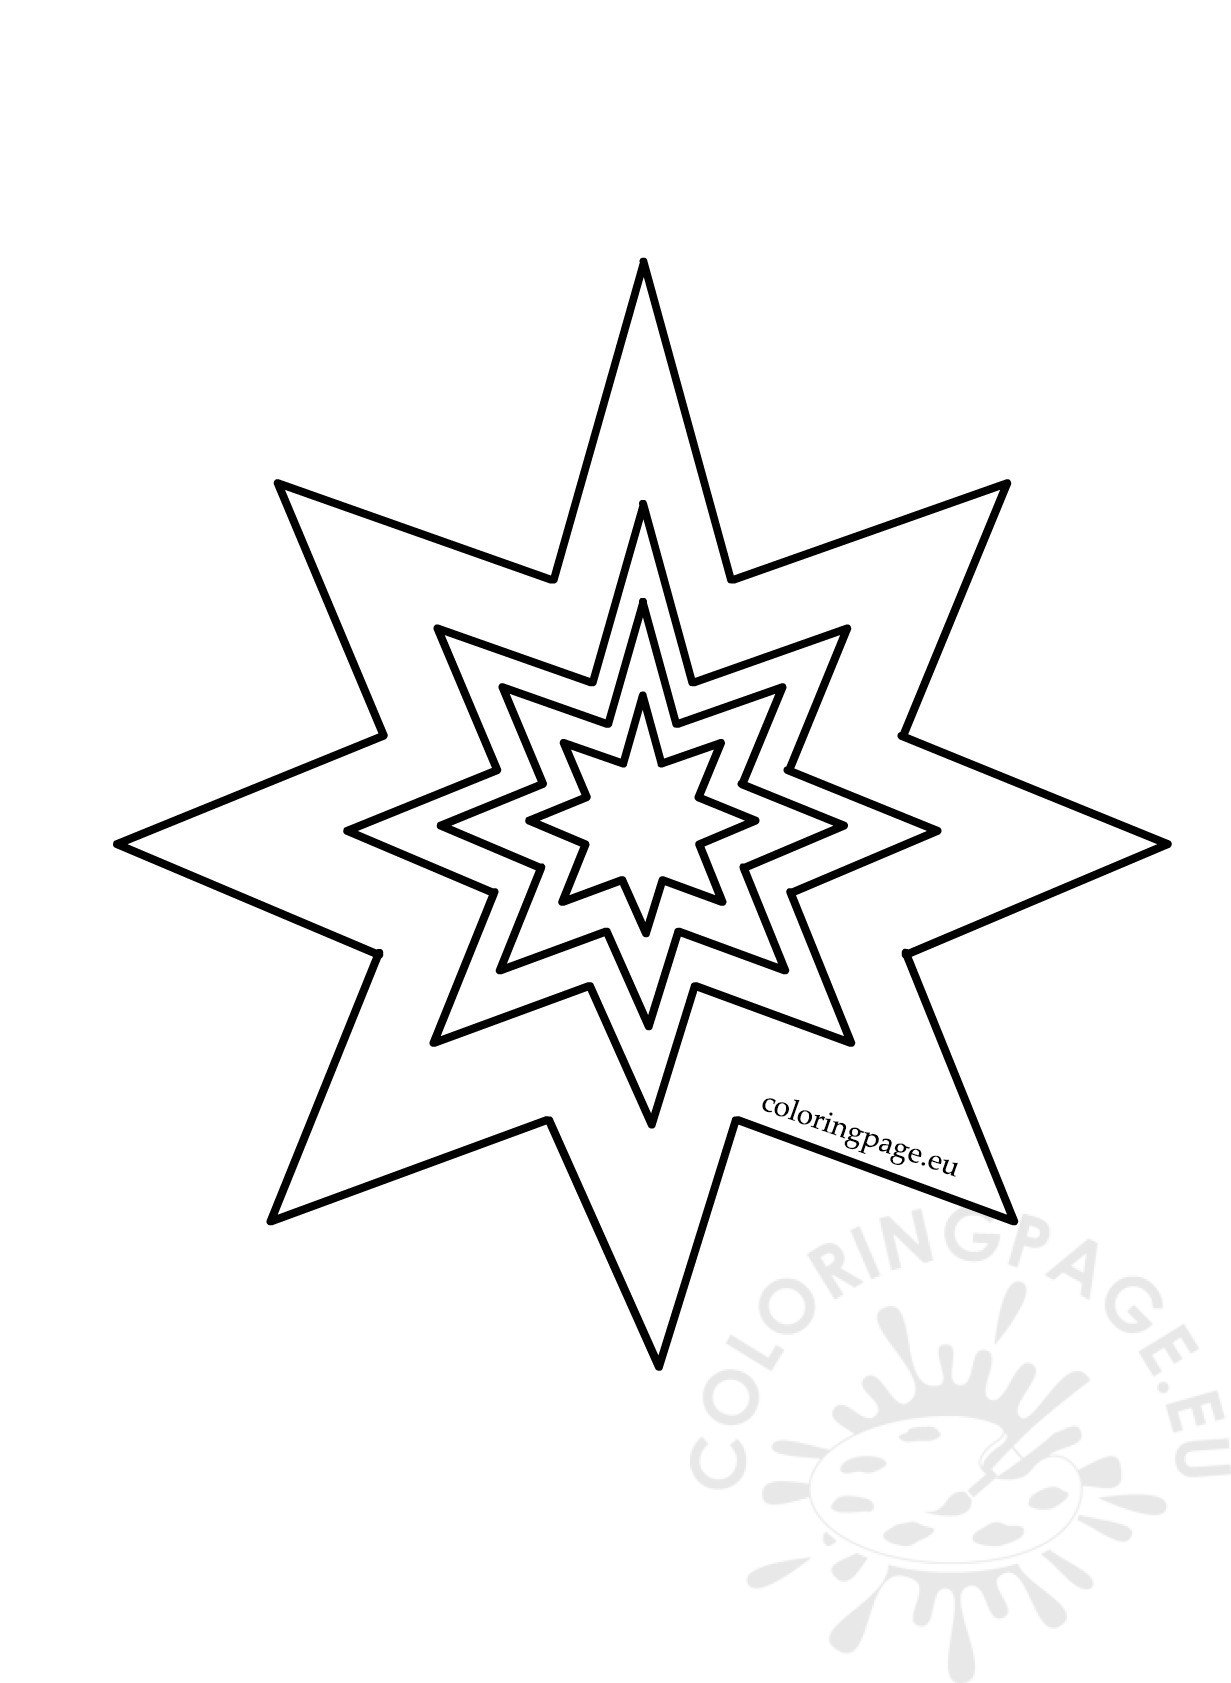 Eight Pointed Star Pattern – Coloring Page1231 x 1683